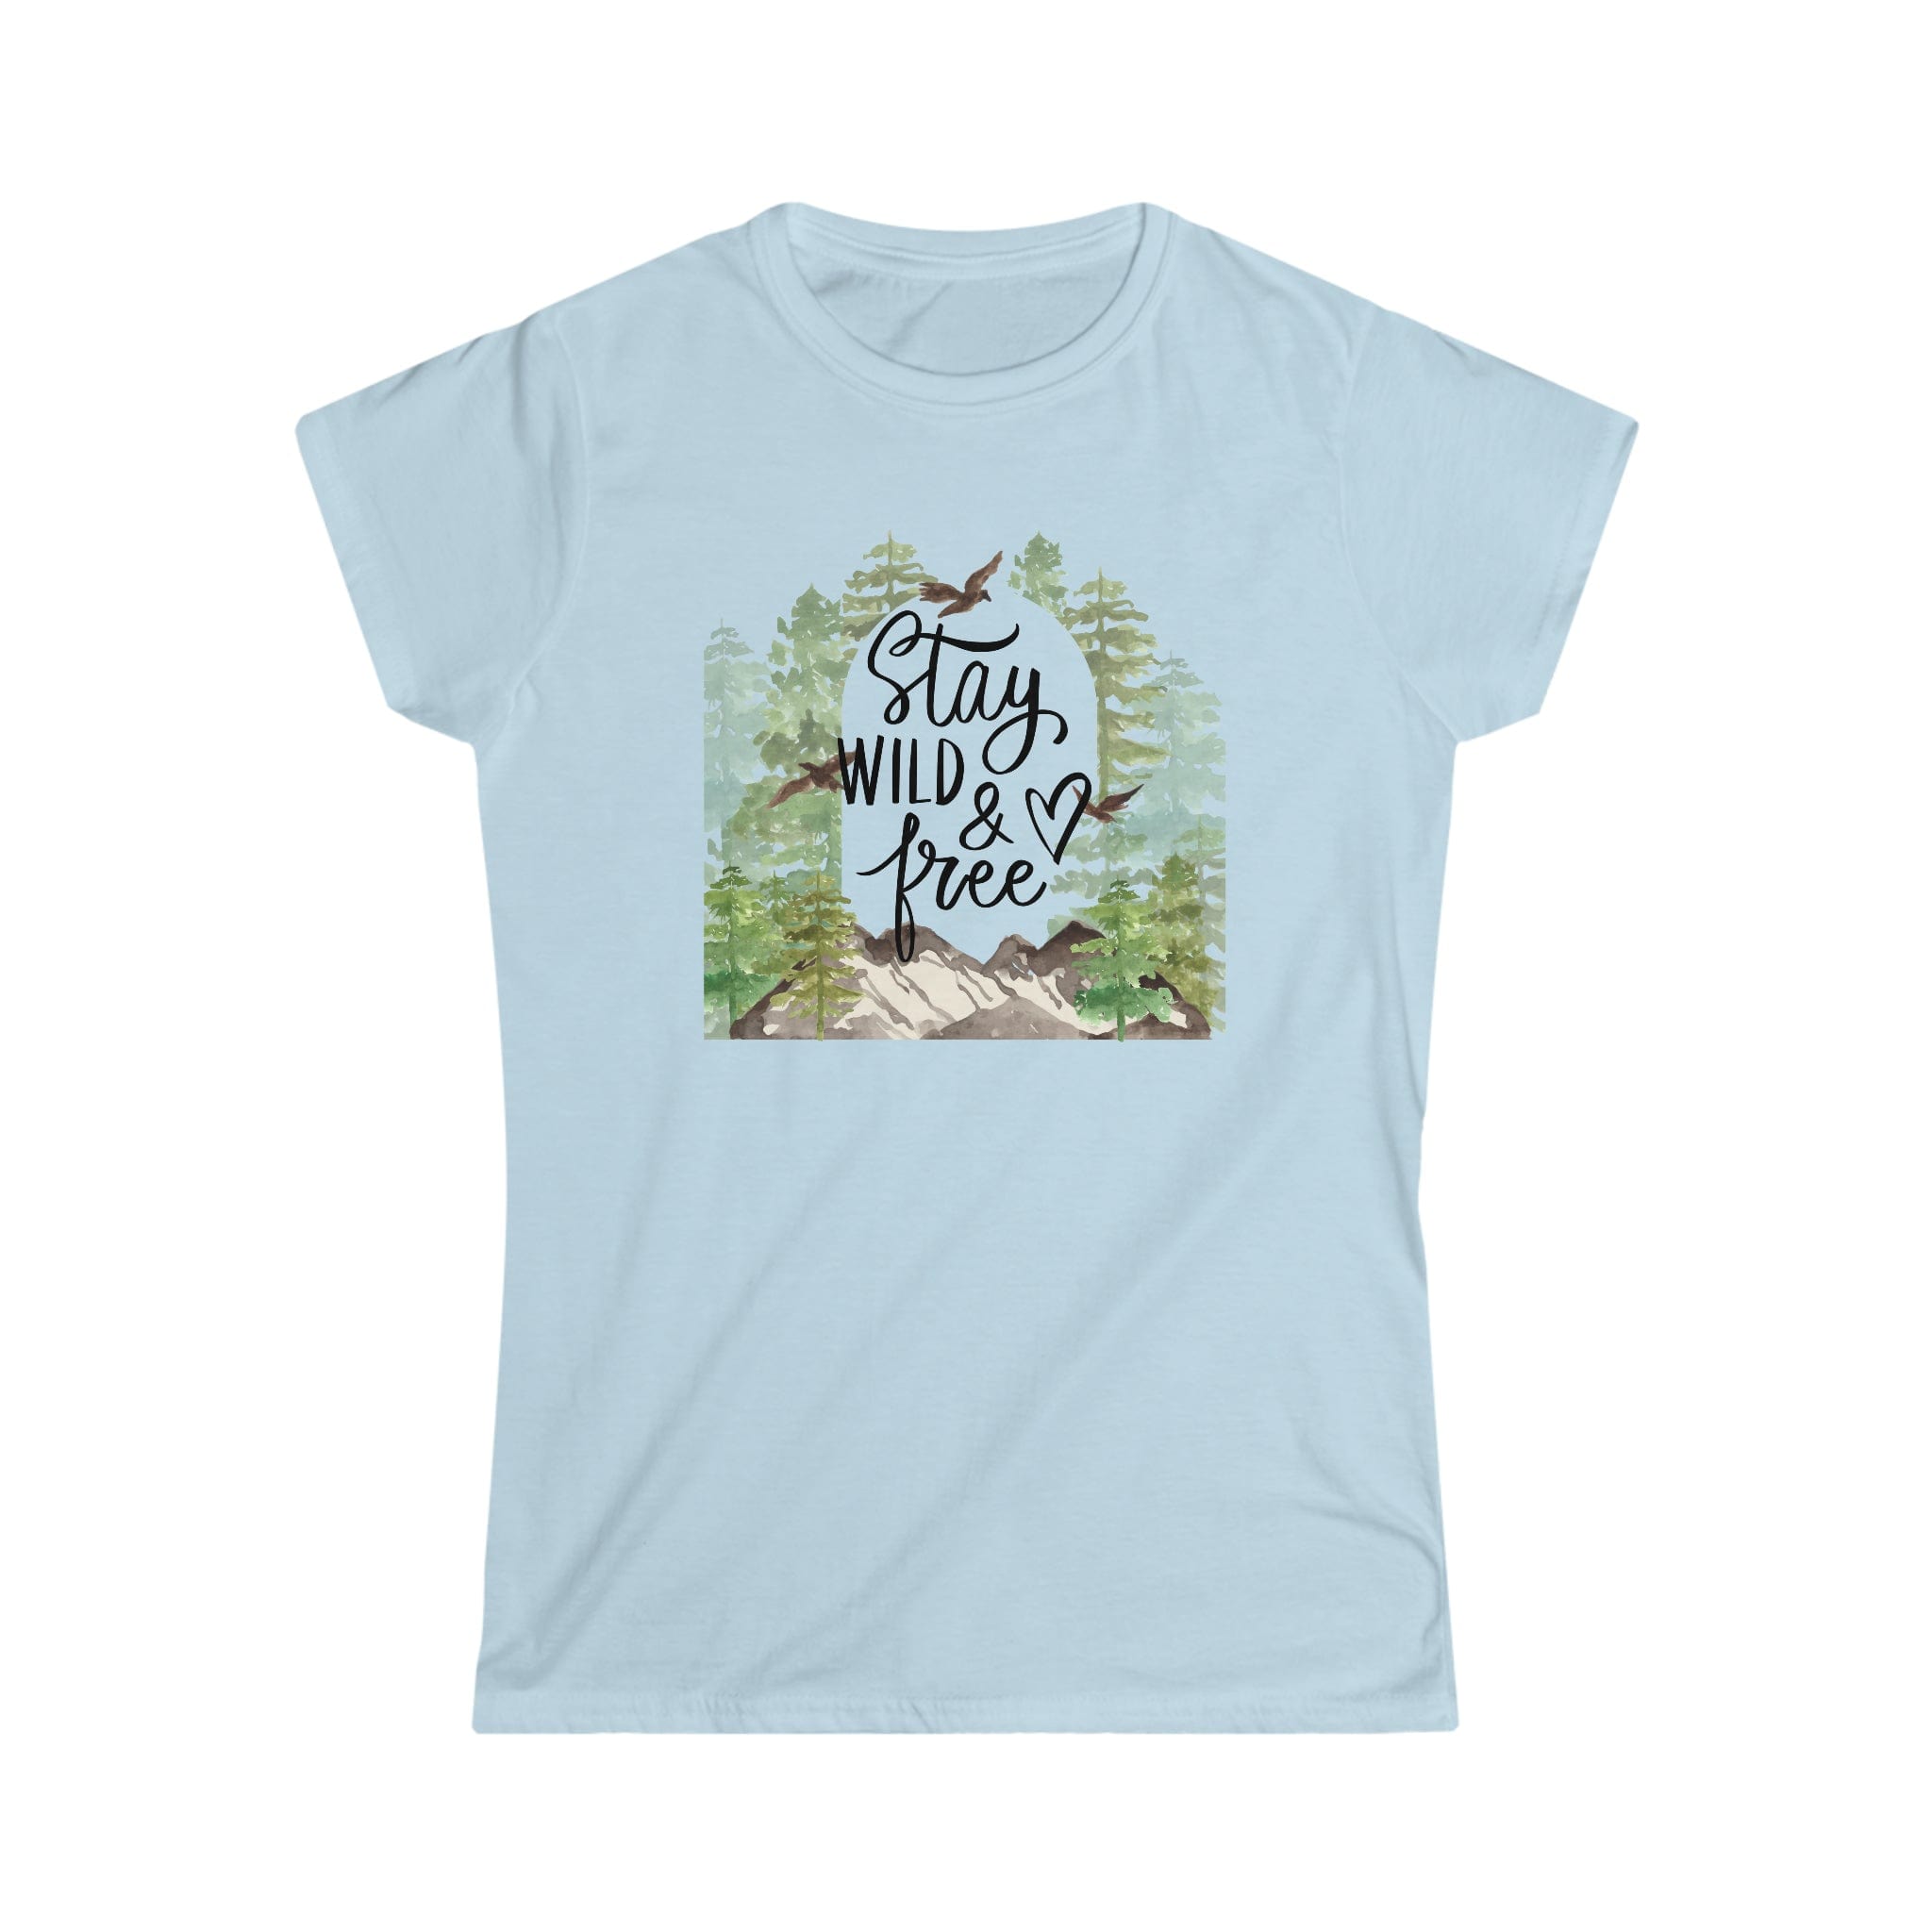 Printify T-Shirt Light Blue / S Stay Wild and Free - Women's Softstyle Tee